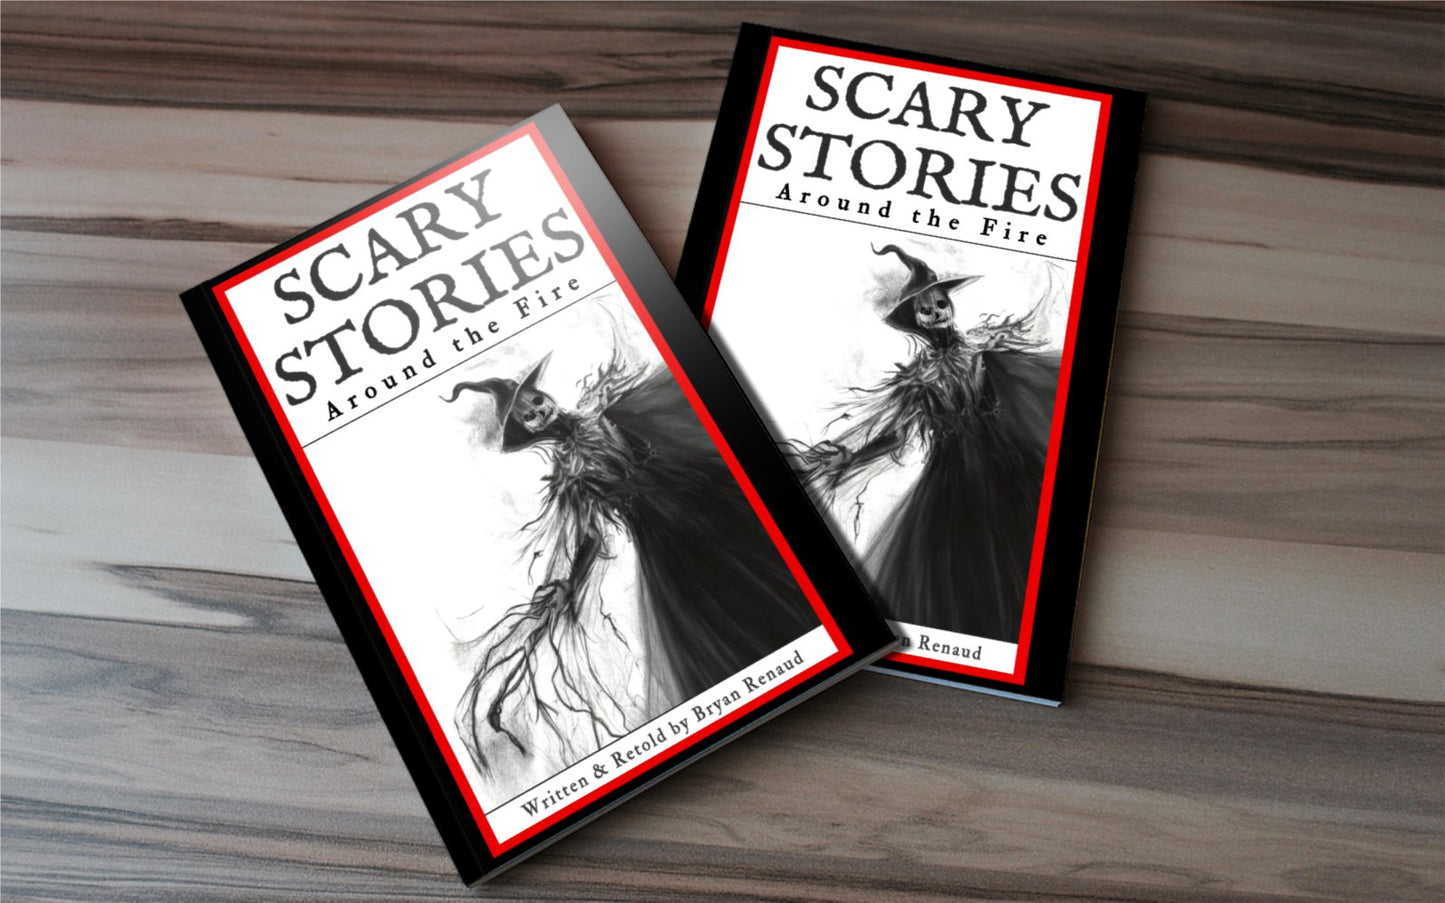 Scary Stories Around the Fire: 13 Chilling Tales! (Paperback Bestseller) by Bryan Renaud - Asylum Books